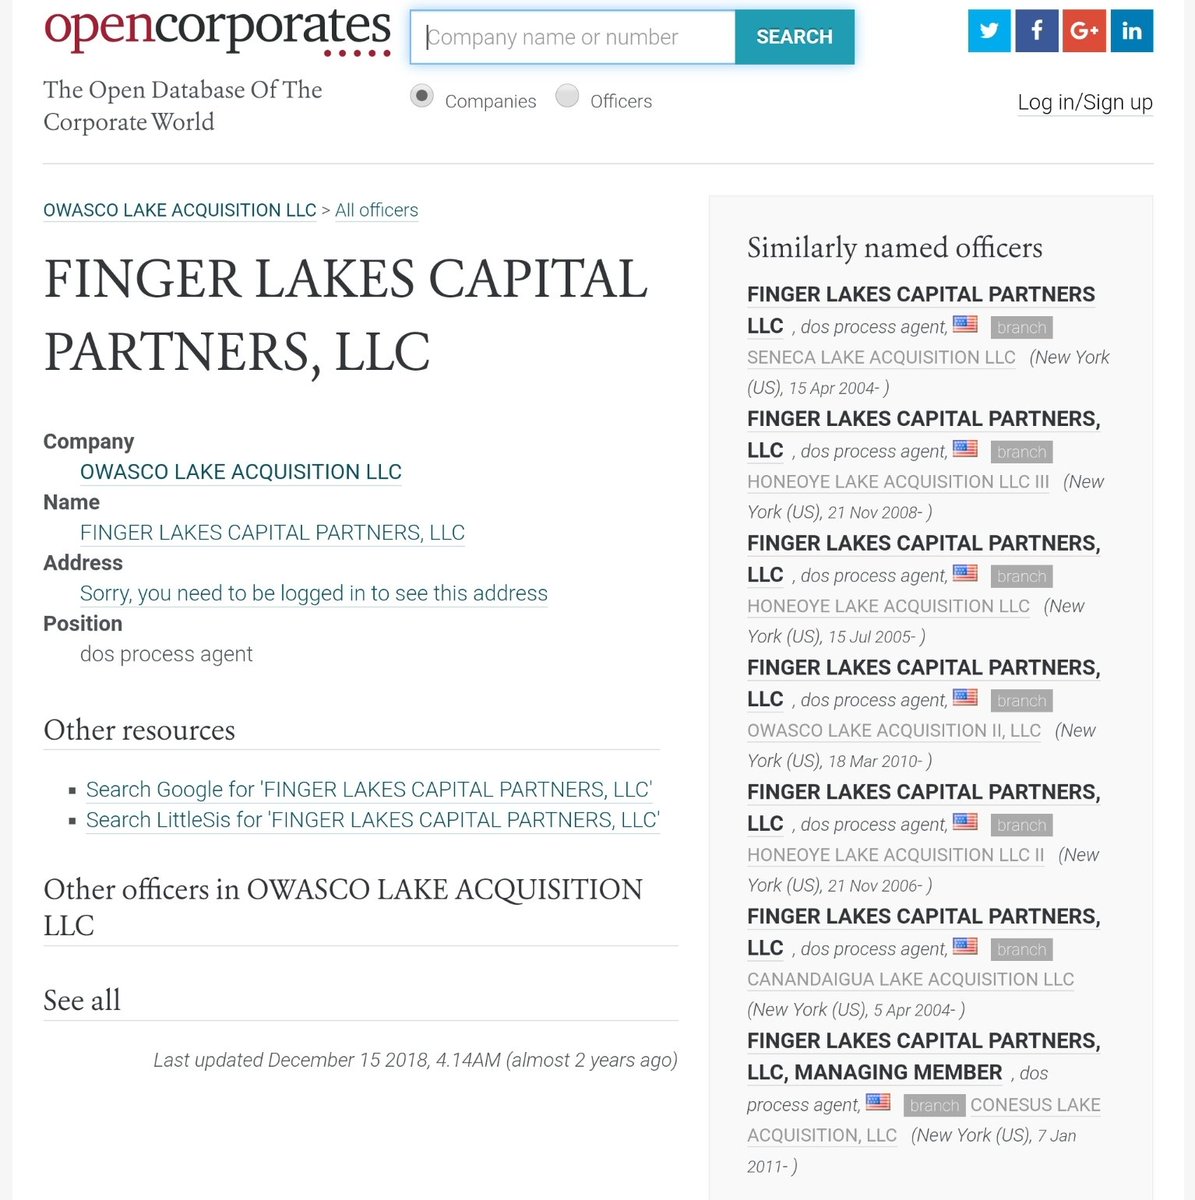 So I started digging and found Hunter's entire Finger Lakes Capital Partners LLC money-laundering empire. 4/ https://opencorporates.com/officers/258131372